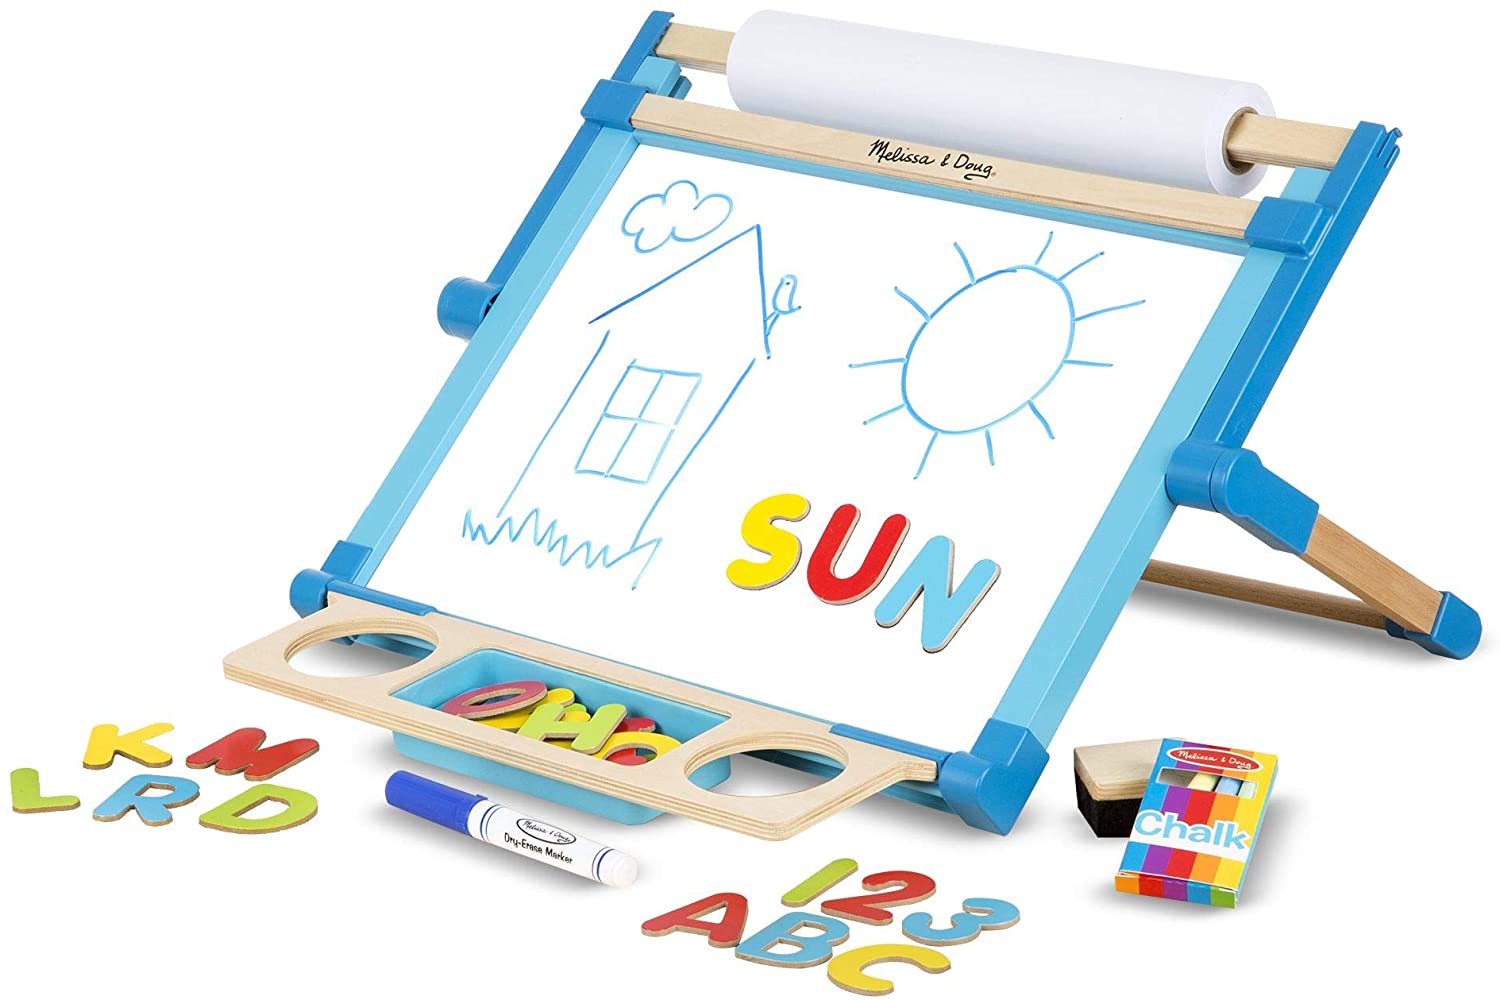 Double Sided Tabletop Easel - Bookazine